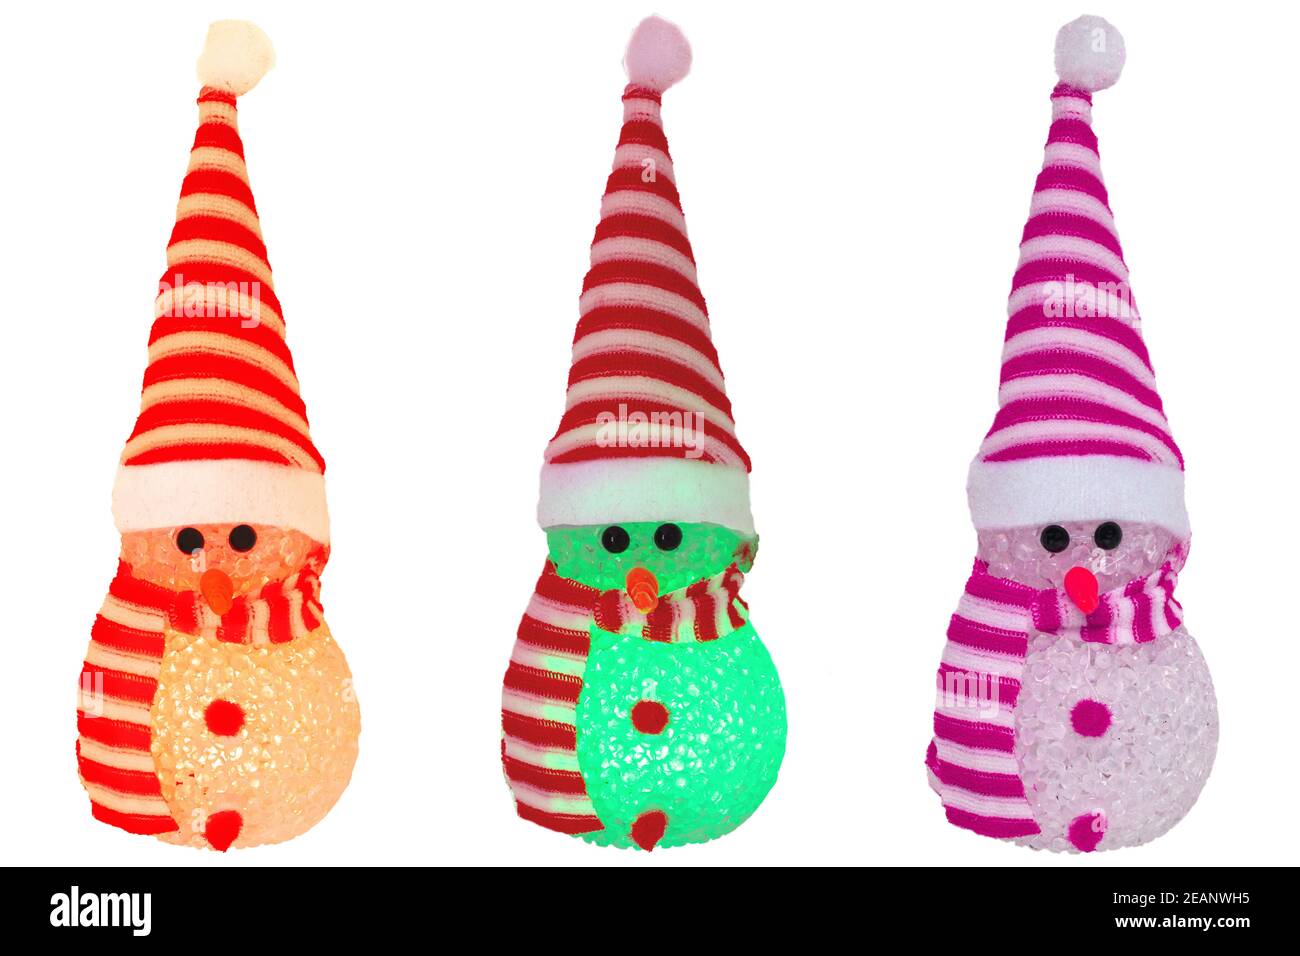 Christmas decoration elements isolated. Close-up of three various colored illuminated happy cute winter snowman with red white striped hat and scarf isolated on a white background. Macro photograph. Stock Photo